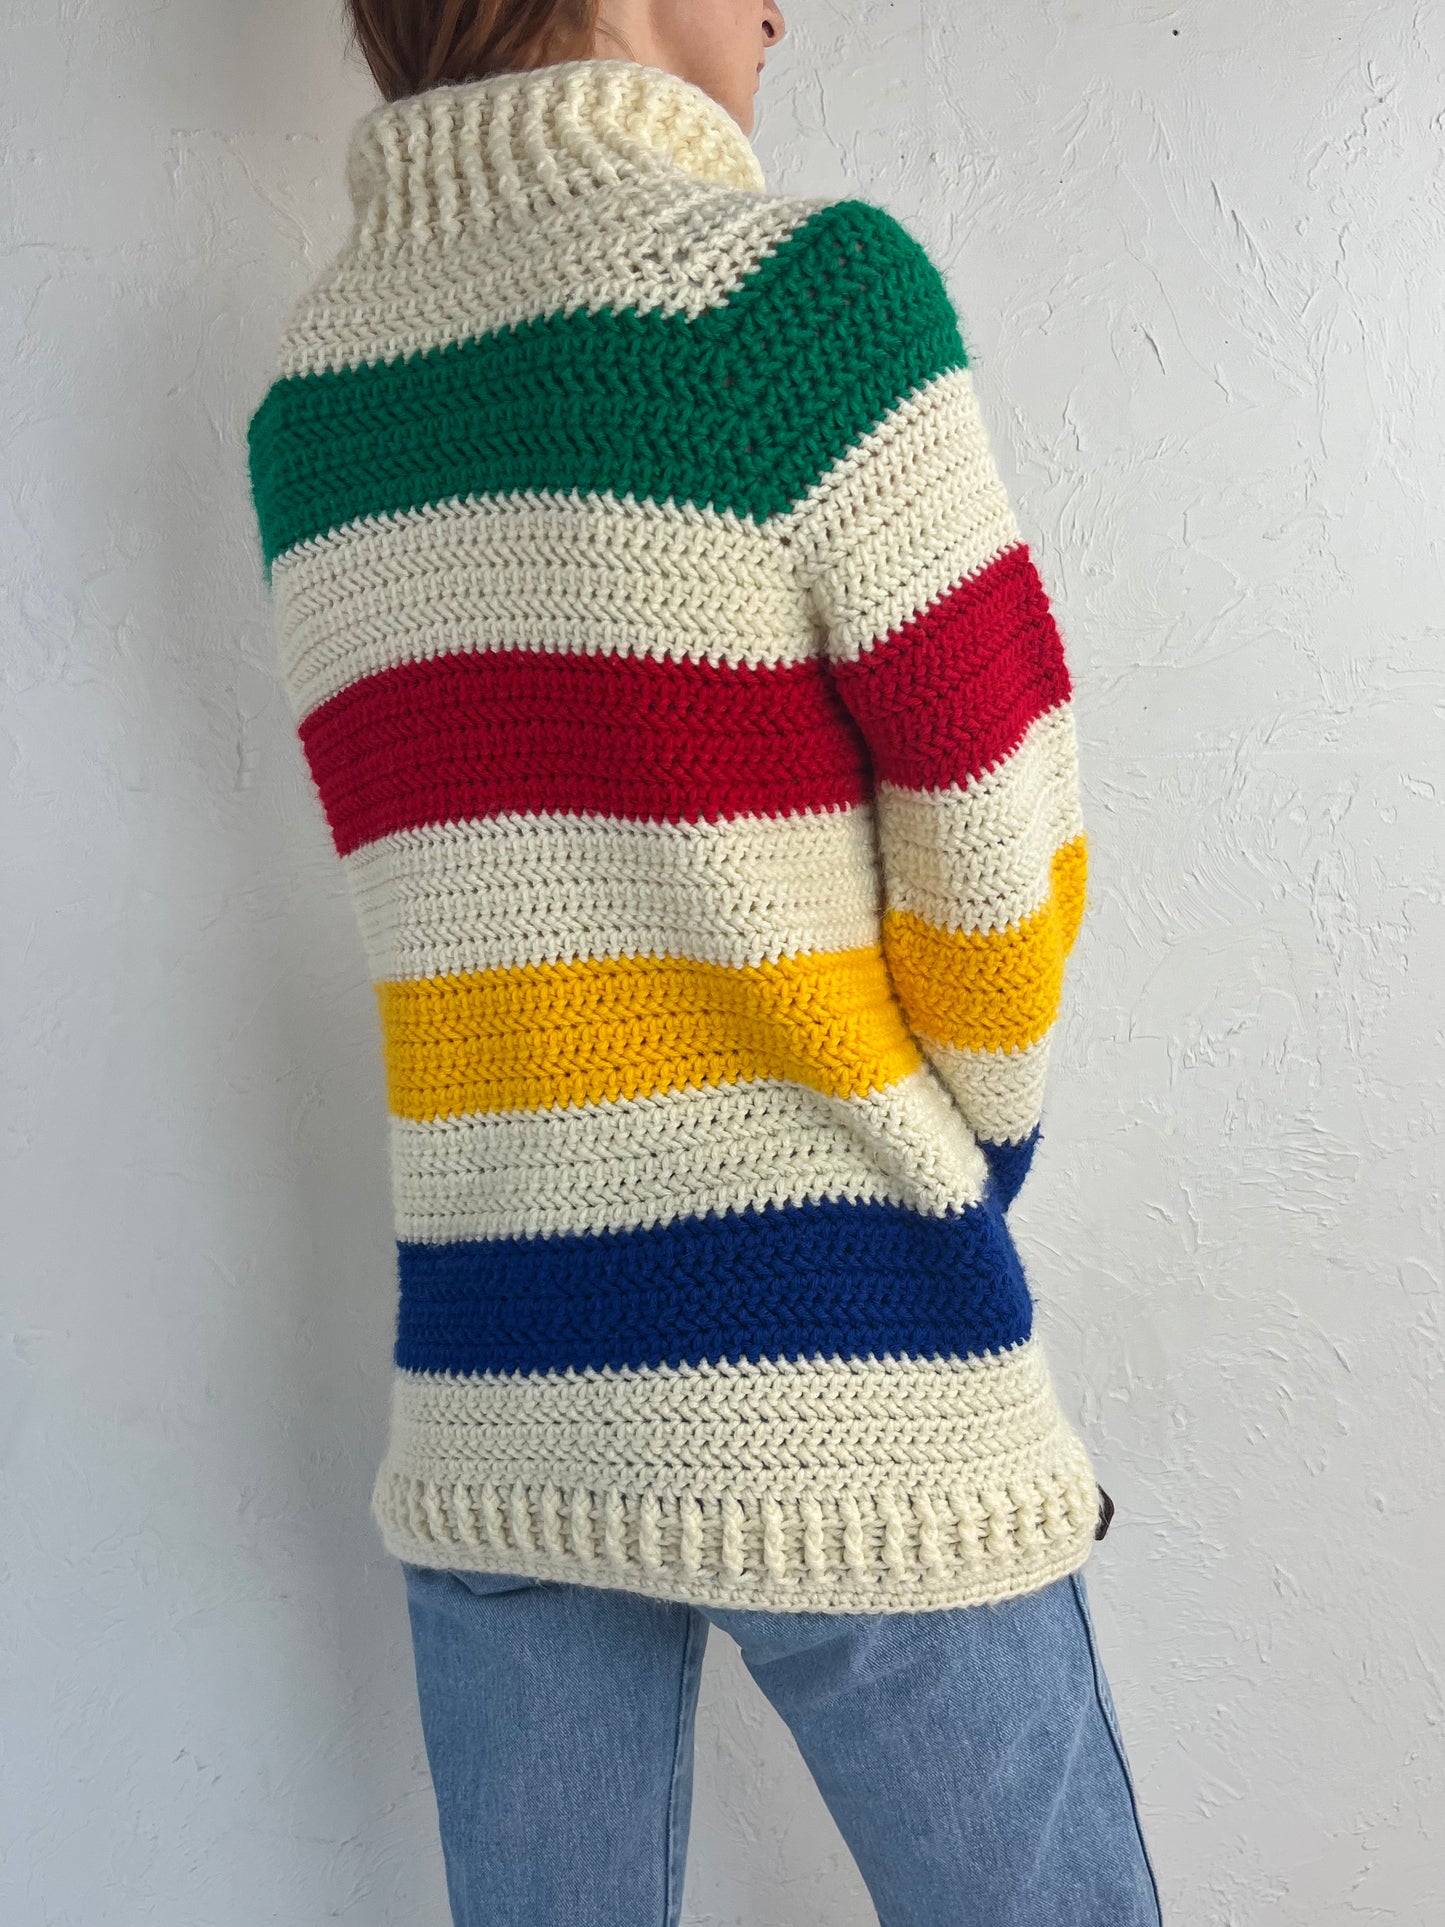 Vintage Hand Knit Striped Cardigan Sweater / Small